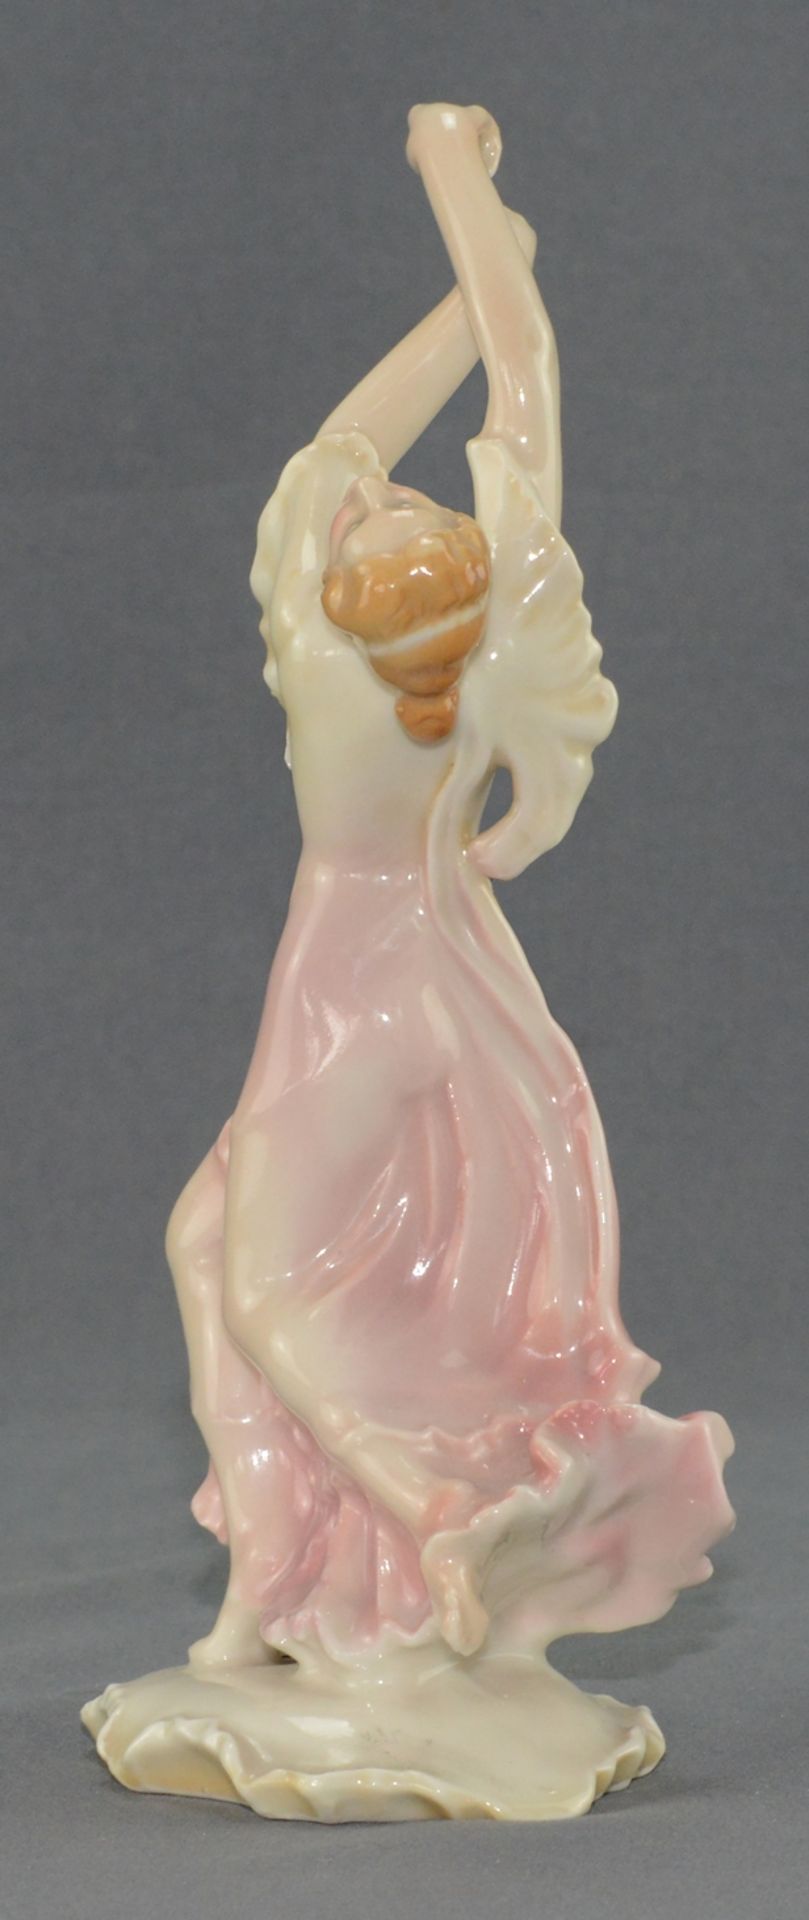 Dancer, in dramatic pose, on curved base, finely polychrome painted, Ens, 20th century, height 21cm - Image 3 of 8